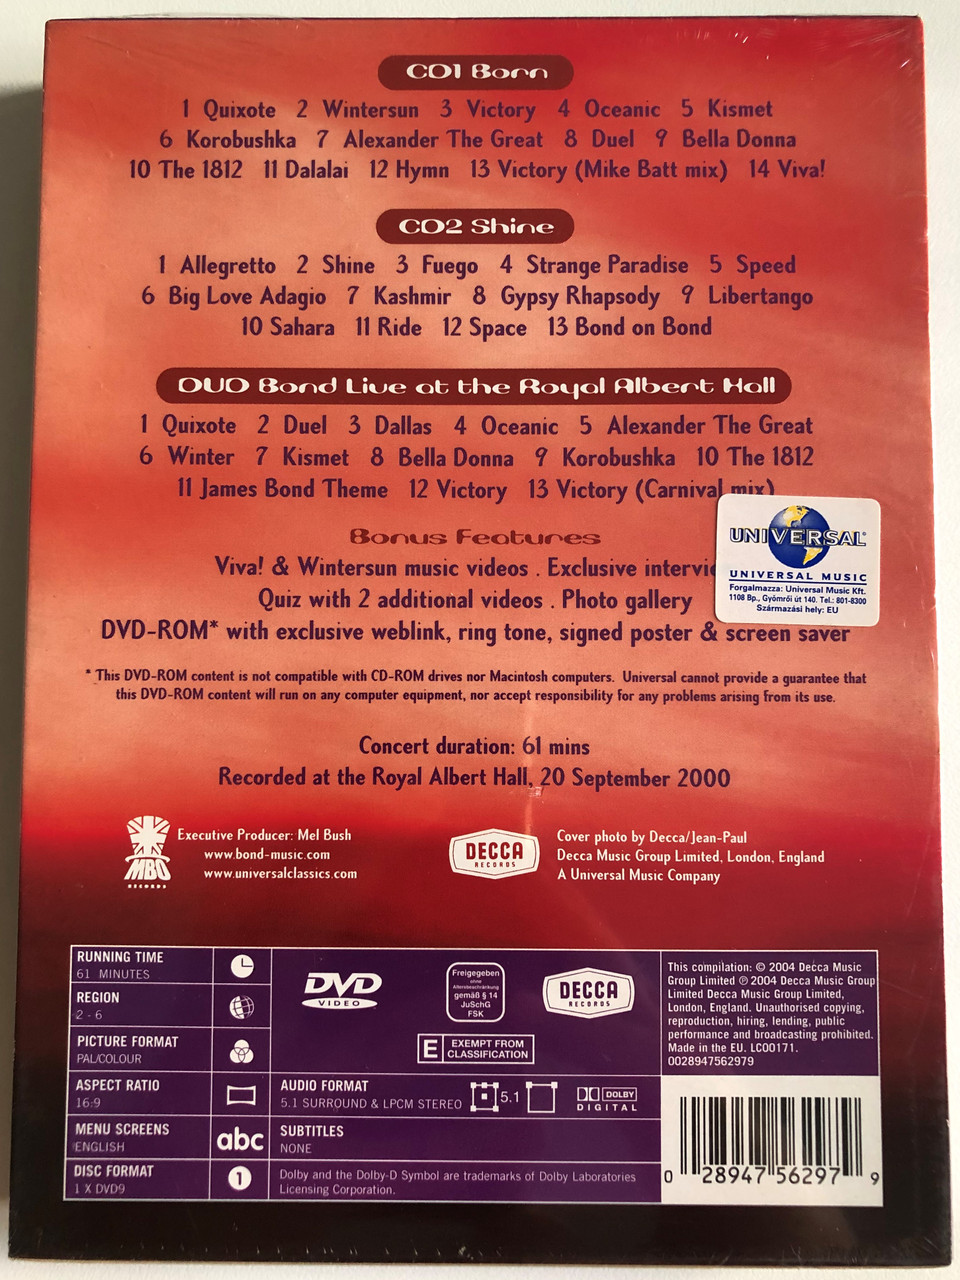 Definitive_Collection_2_CD_DVD_Set_Bond_Live_at_the_Royal_Albert_Hall_Bonus_Features_Viva_Wintersun_music_videos._Exclusive_interview_Recorded_at_the_Royal_Albert_Hall_20_3__24170.1692178180.1280.1280.JPG (960×1280)